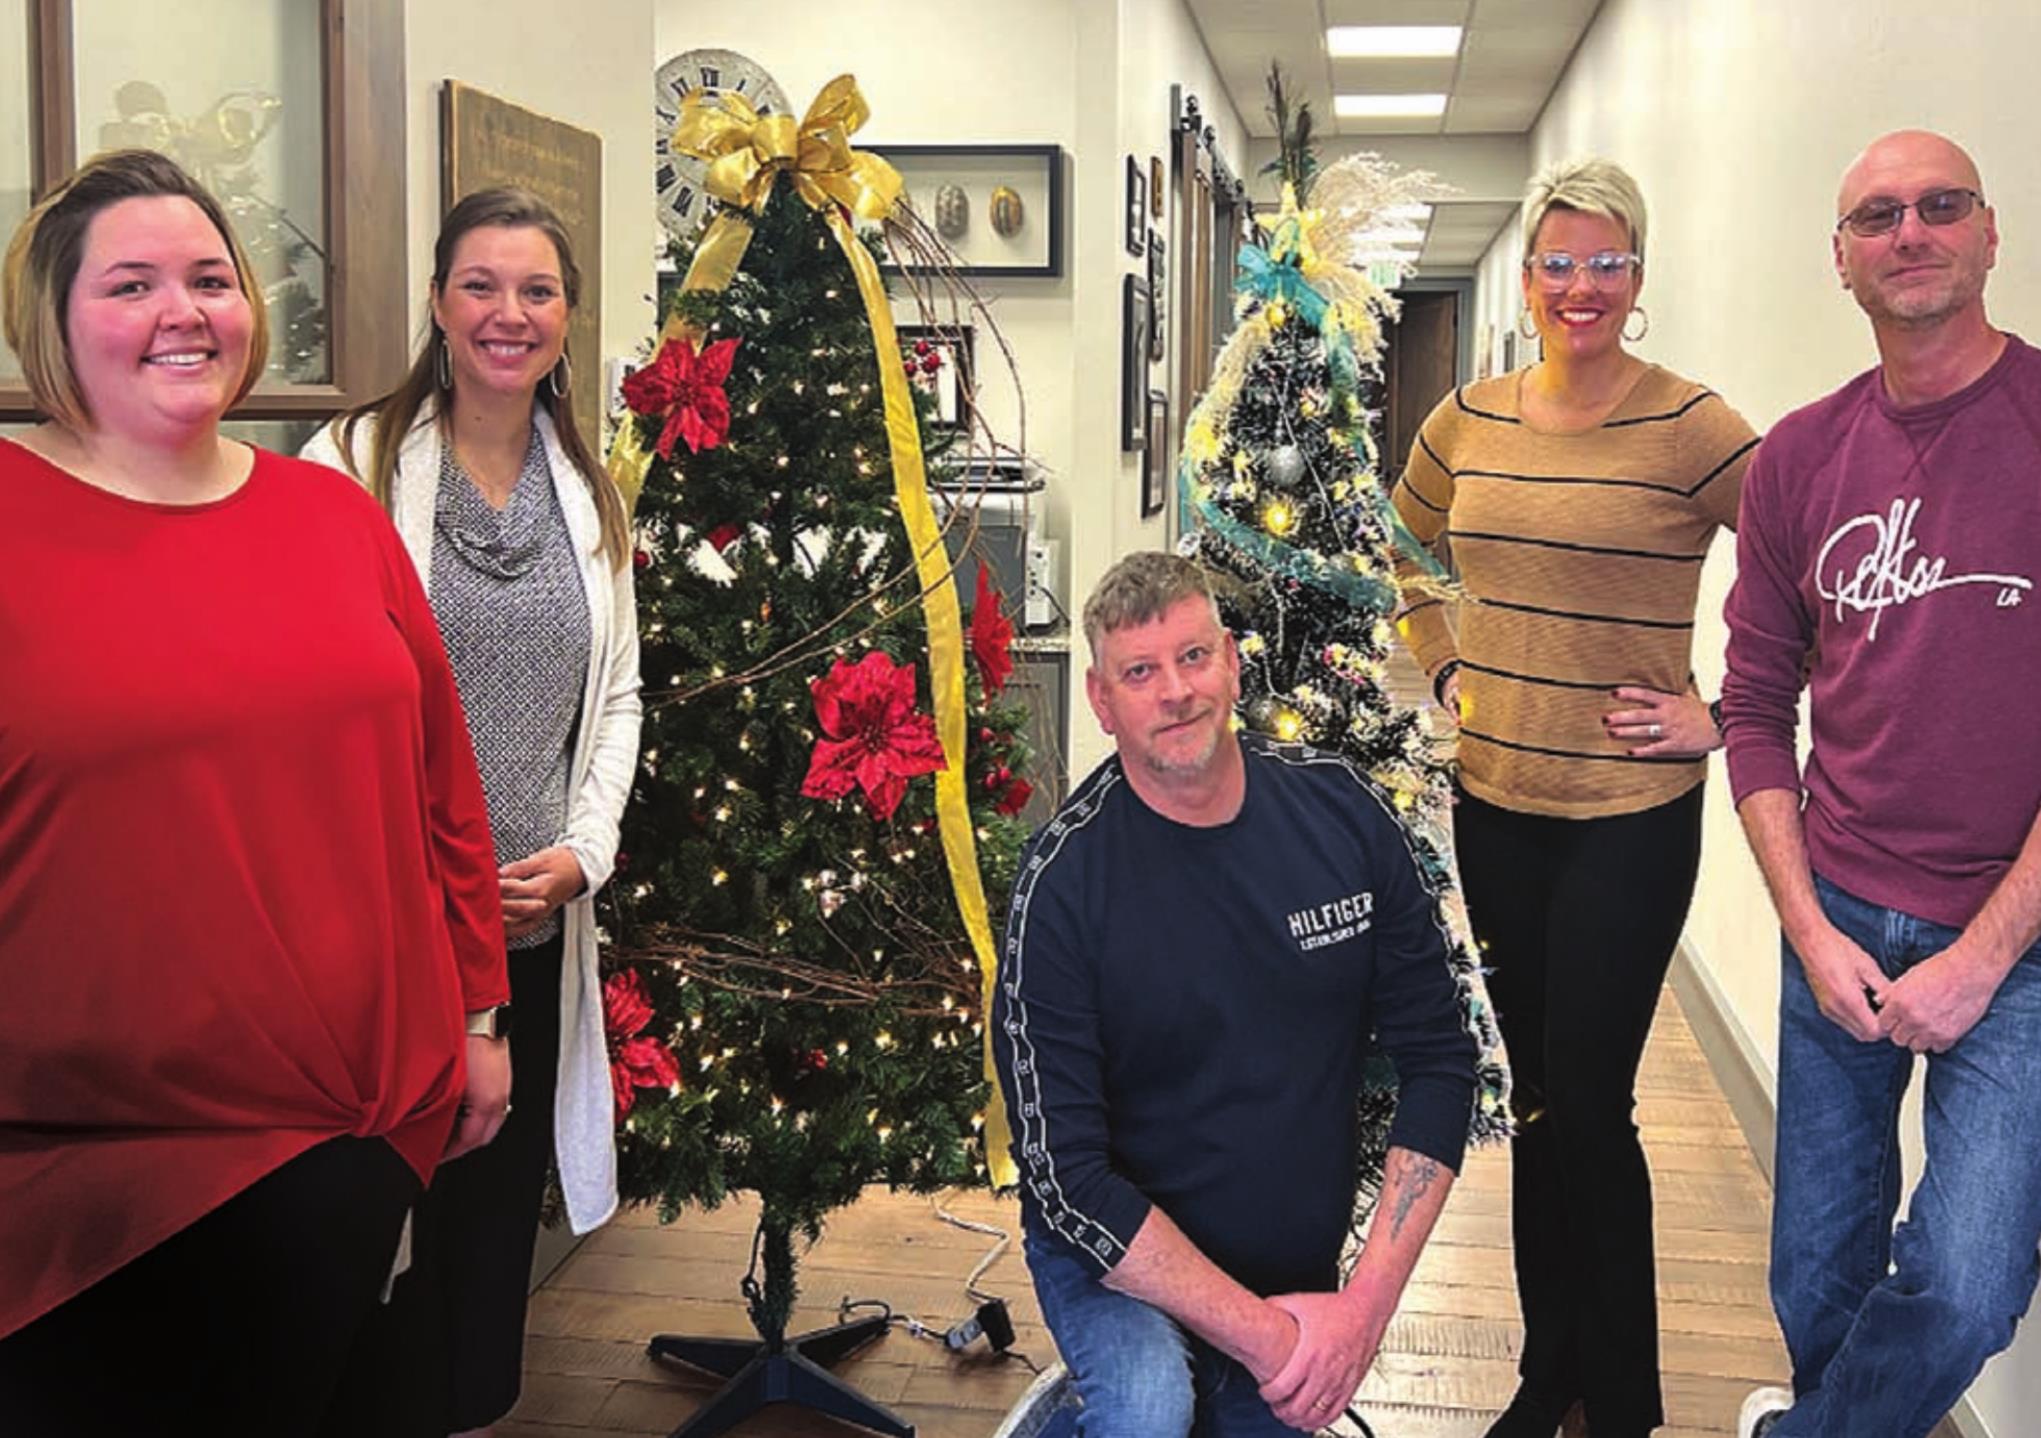 The Weatherford Regional Hospital Foundation accepted Christmas trees to be on display at the hospital from Kings Flowers and Gifts. From left are Katherine Smith, Jenna Leven, Roger Blackshear, Katie Bartmann and Mark Musick.